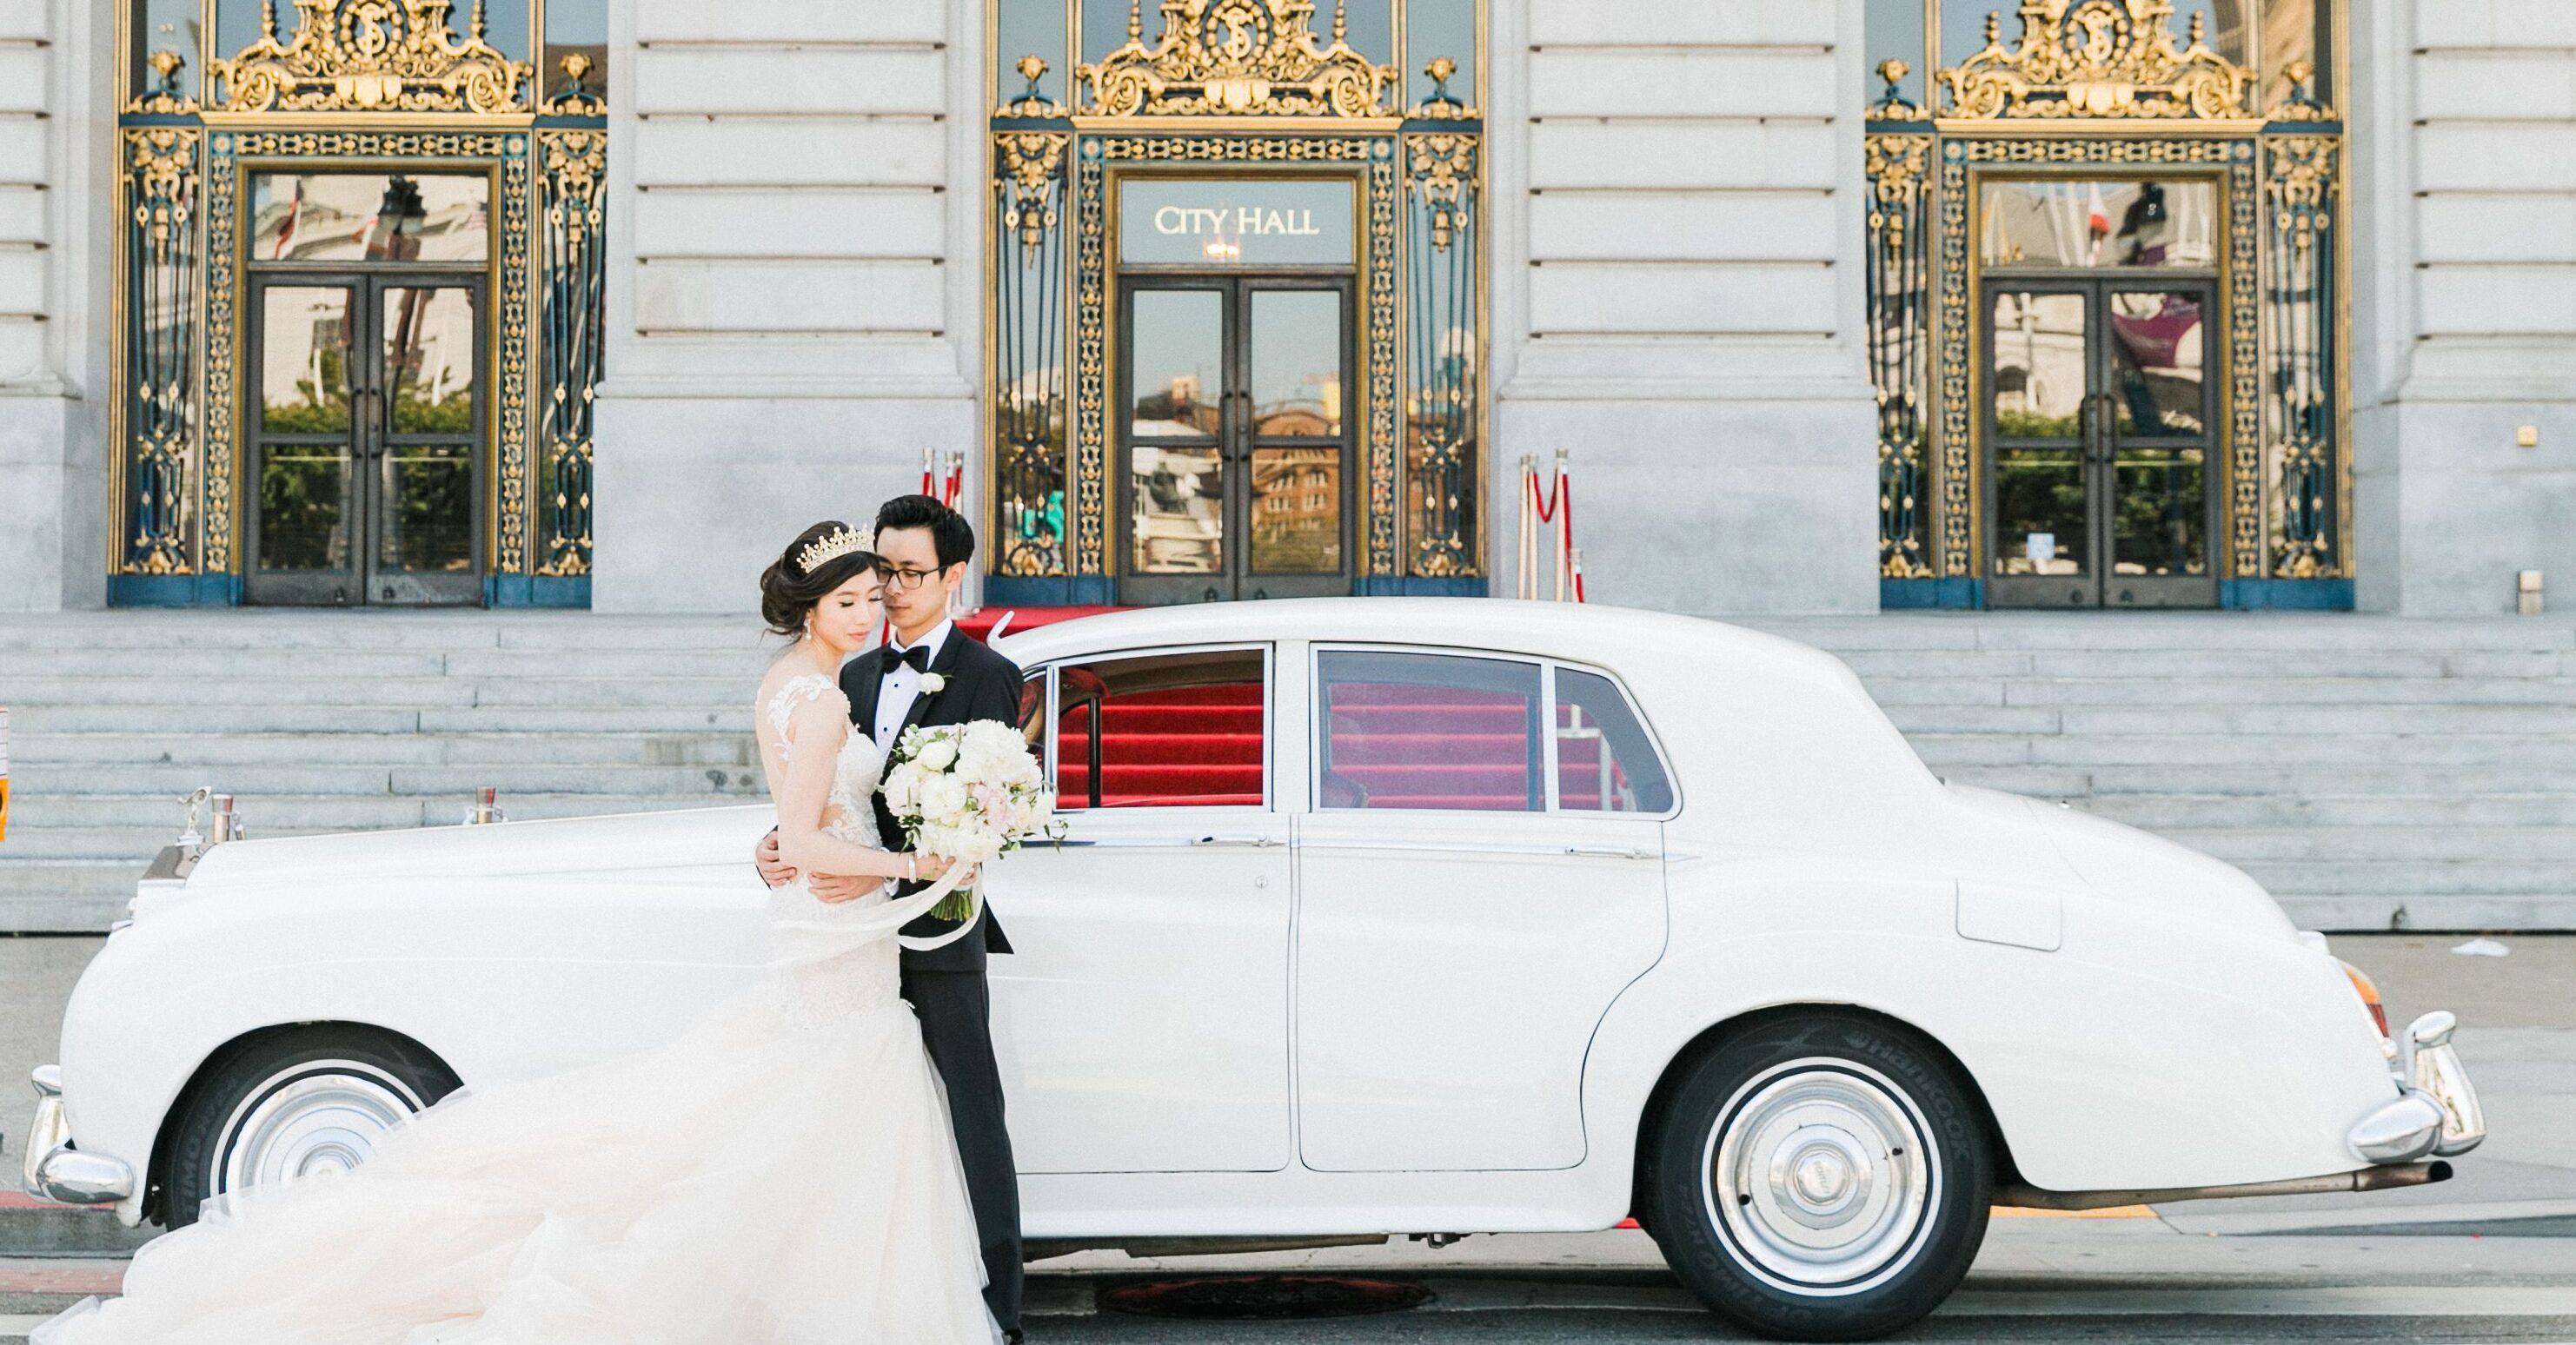 18 Of Our Favorite Over The Top Wedding Ideas